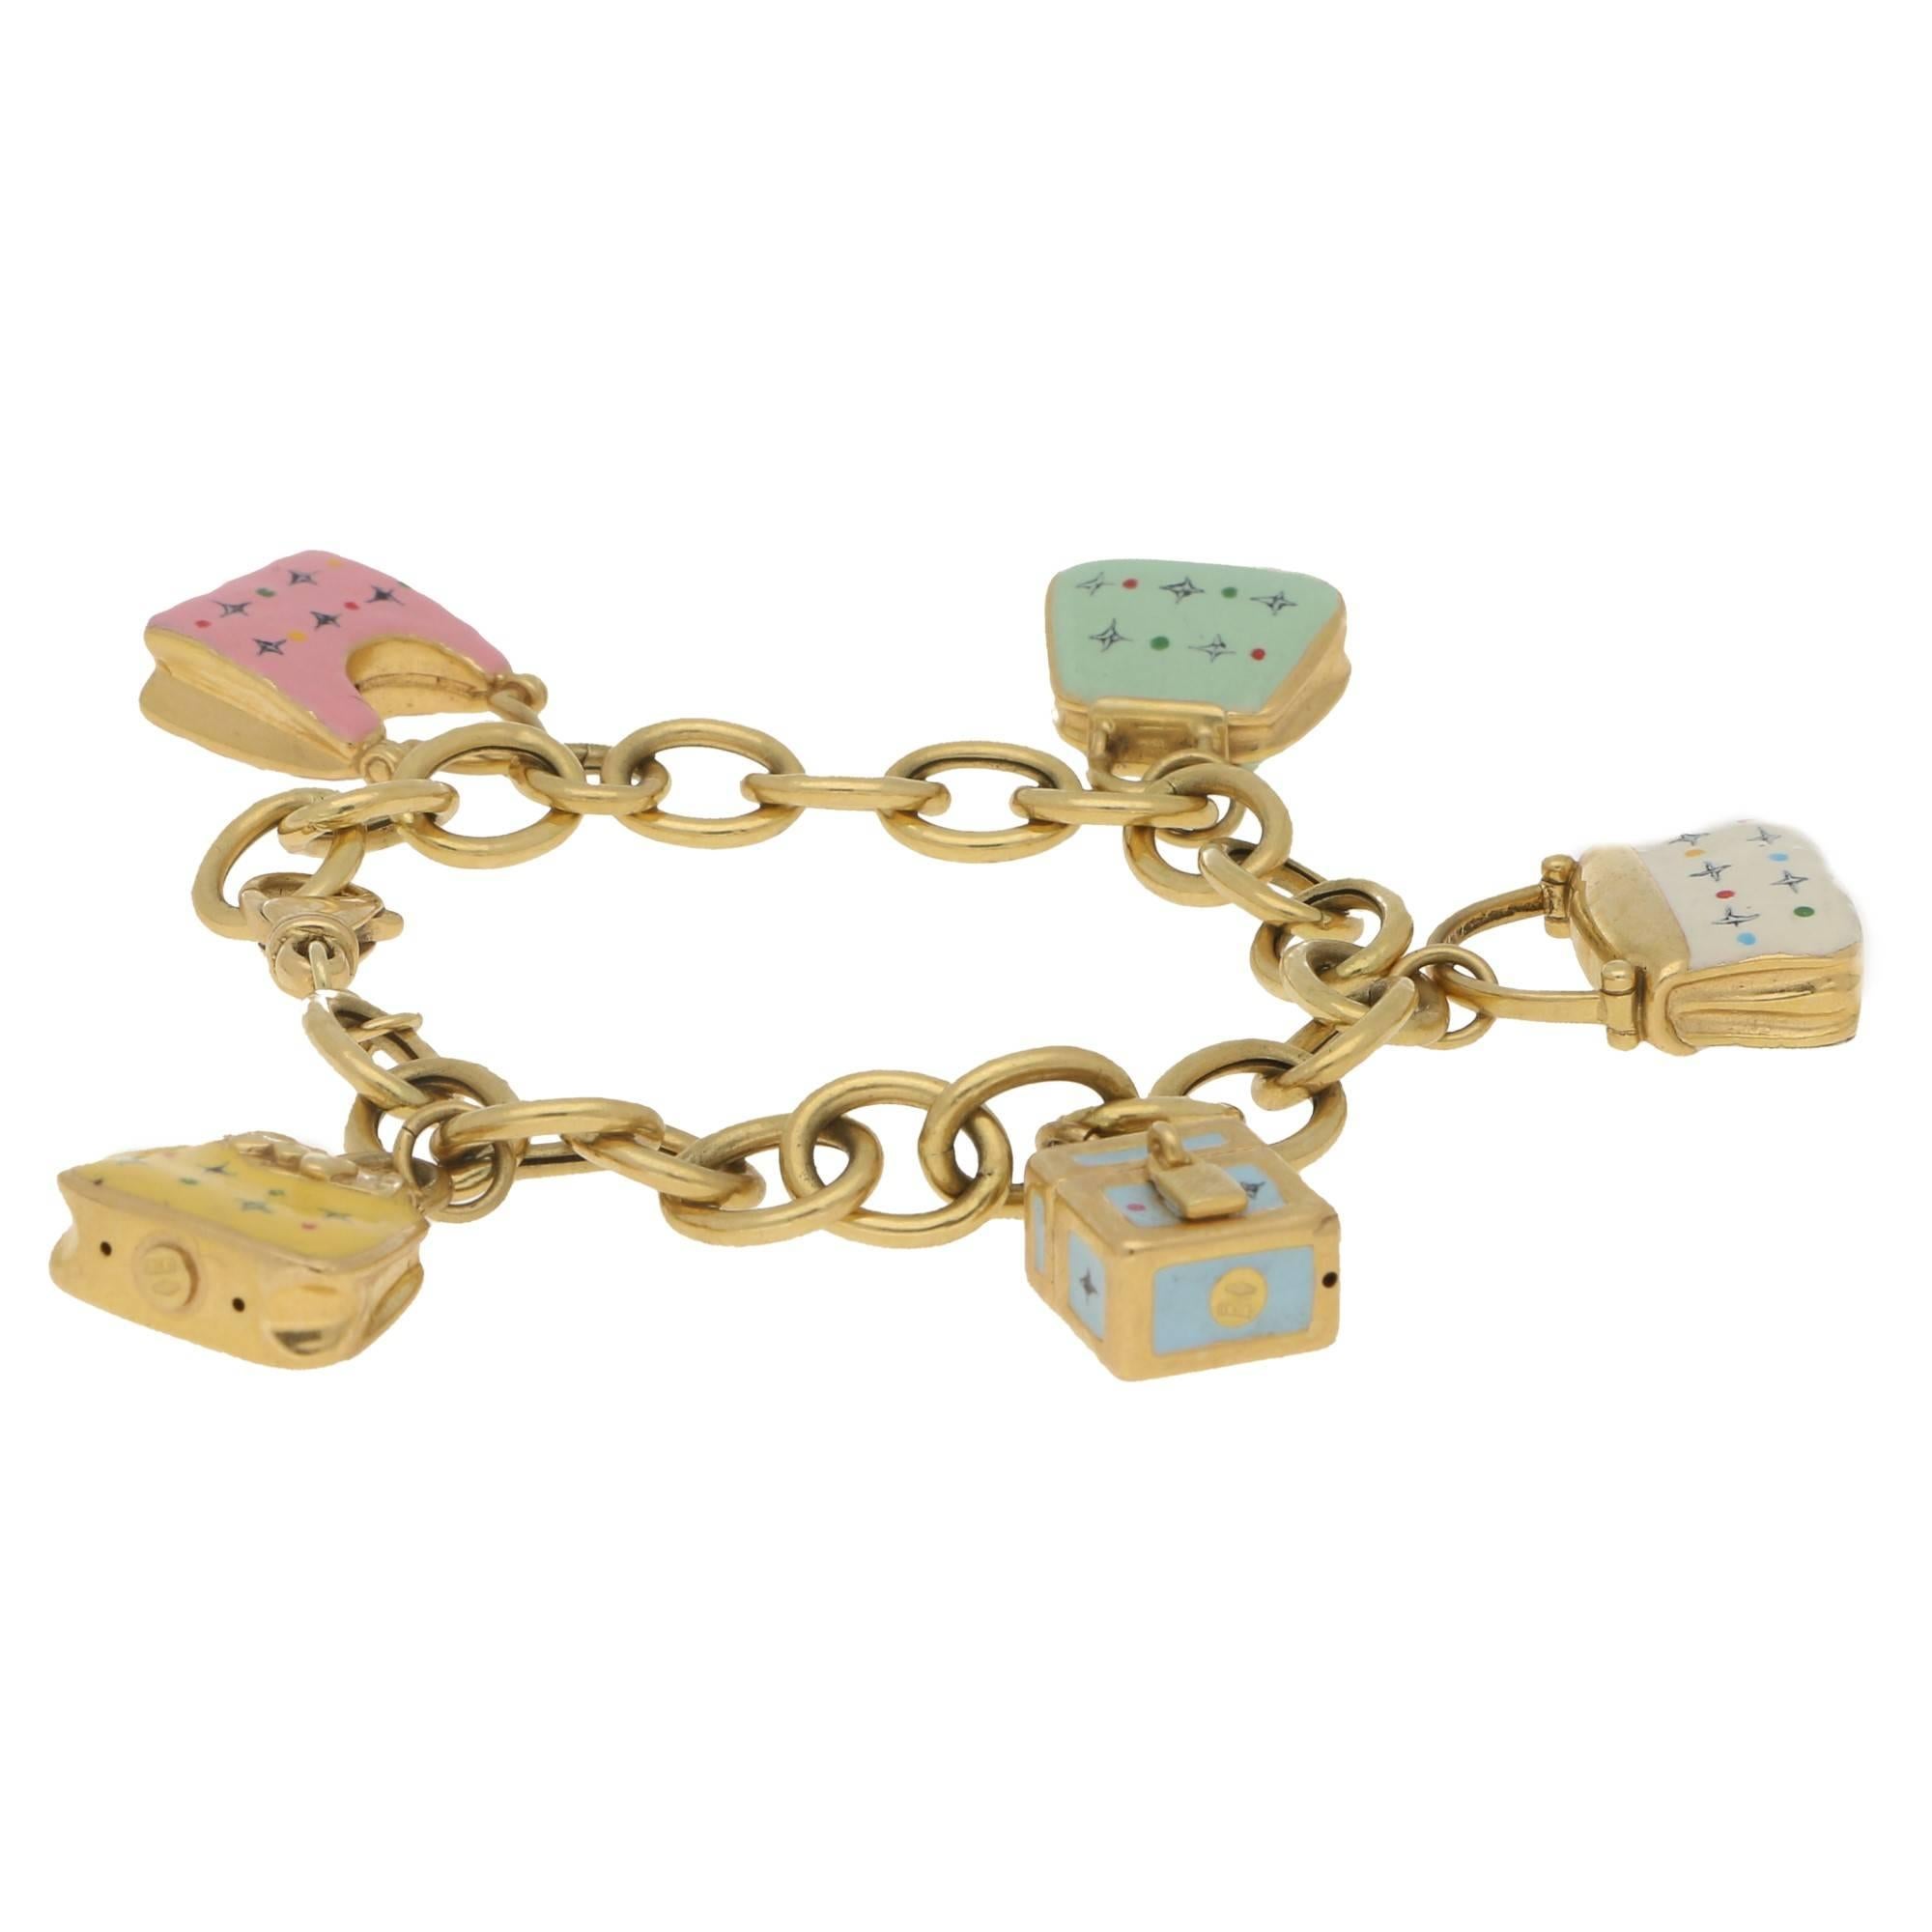 A quirky 18k gold bracelet set with five detailed handbag charms. Each charm is unique in colour and design, with fine enamel work detailing. On a chunky secure lobster clasp. Length 7.5 inches total.